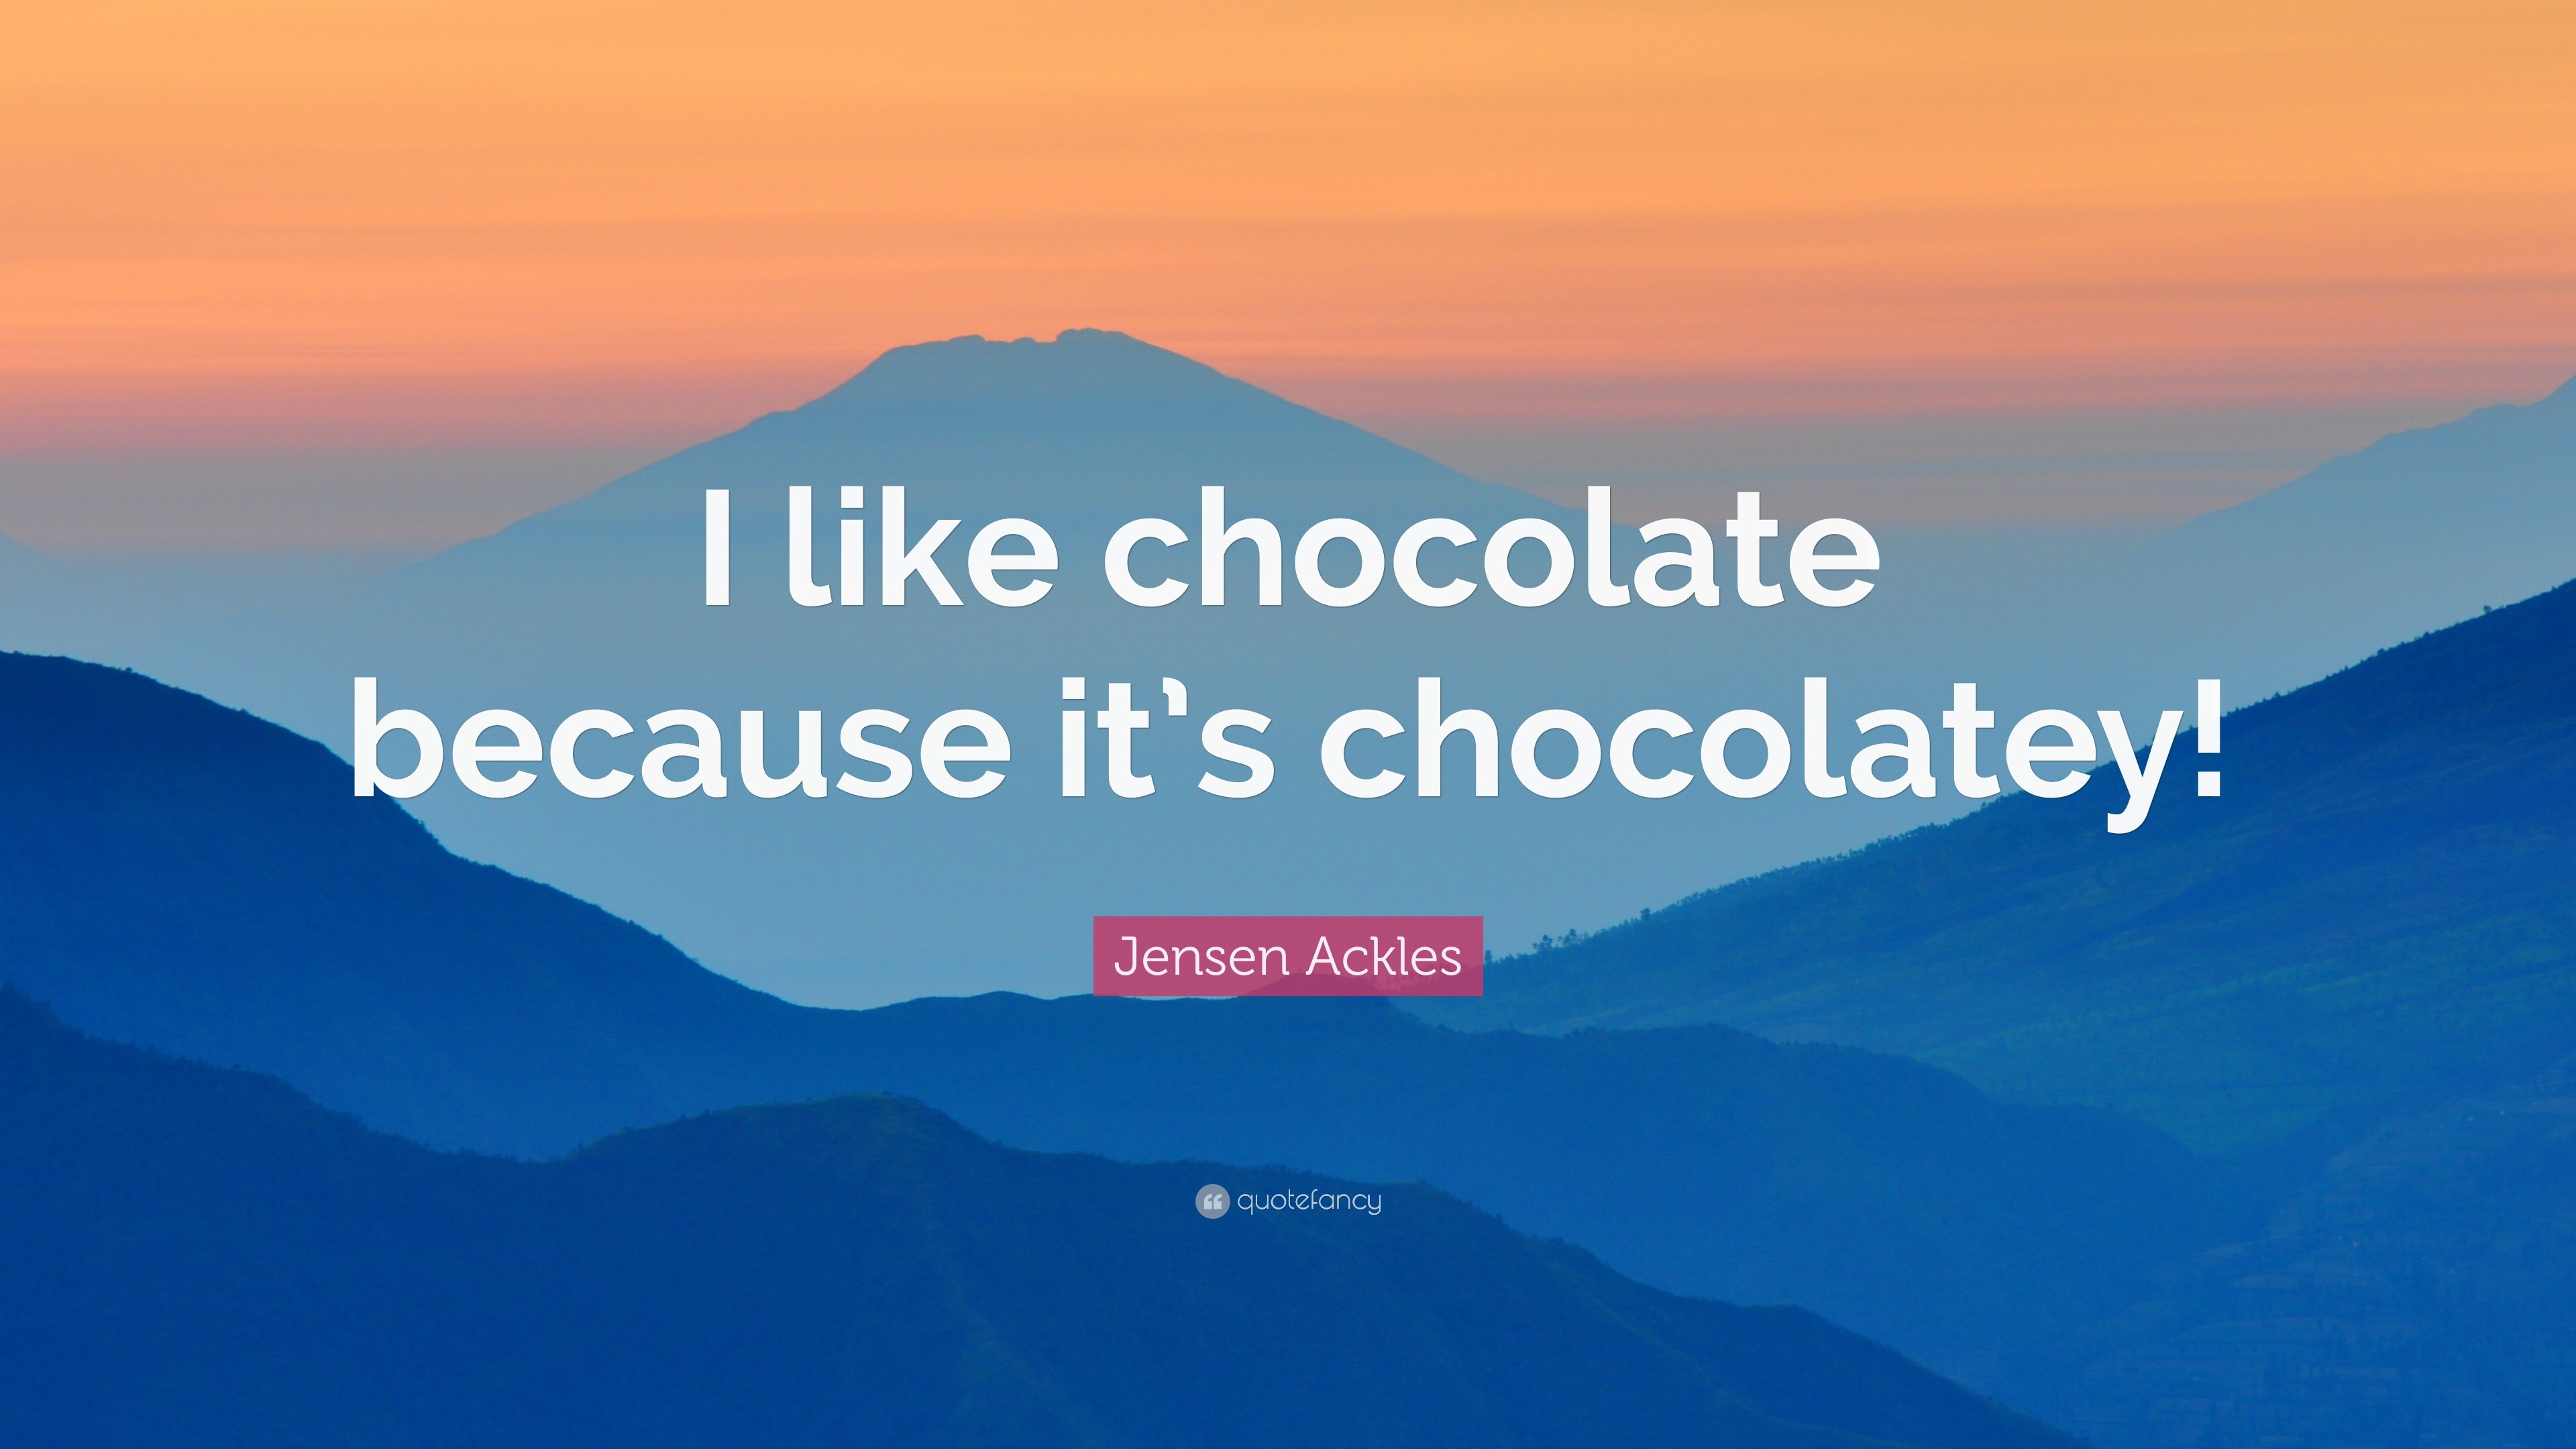 Jensen Ackles Quote: “I like chocolate because it’s chocolatey!”